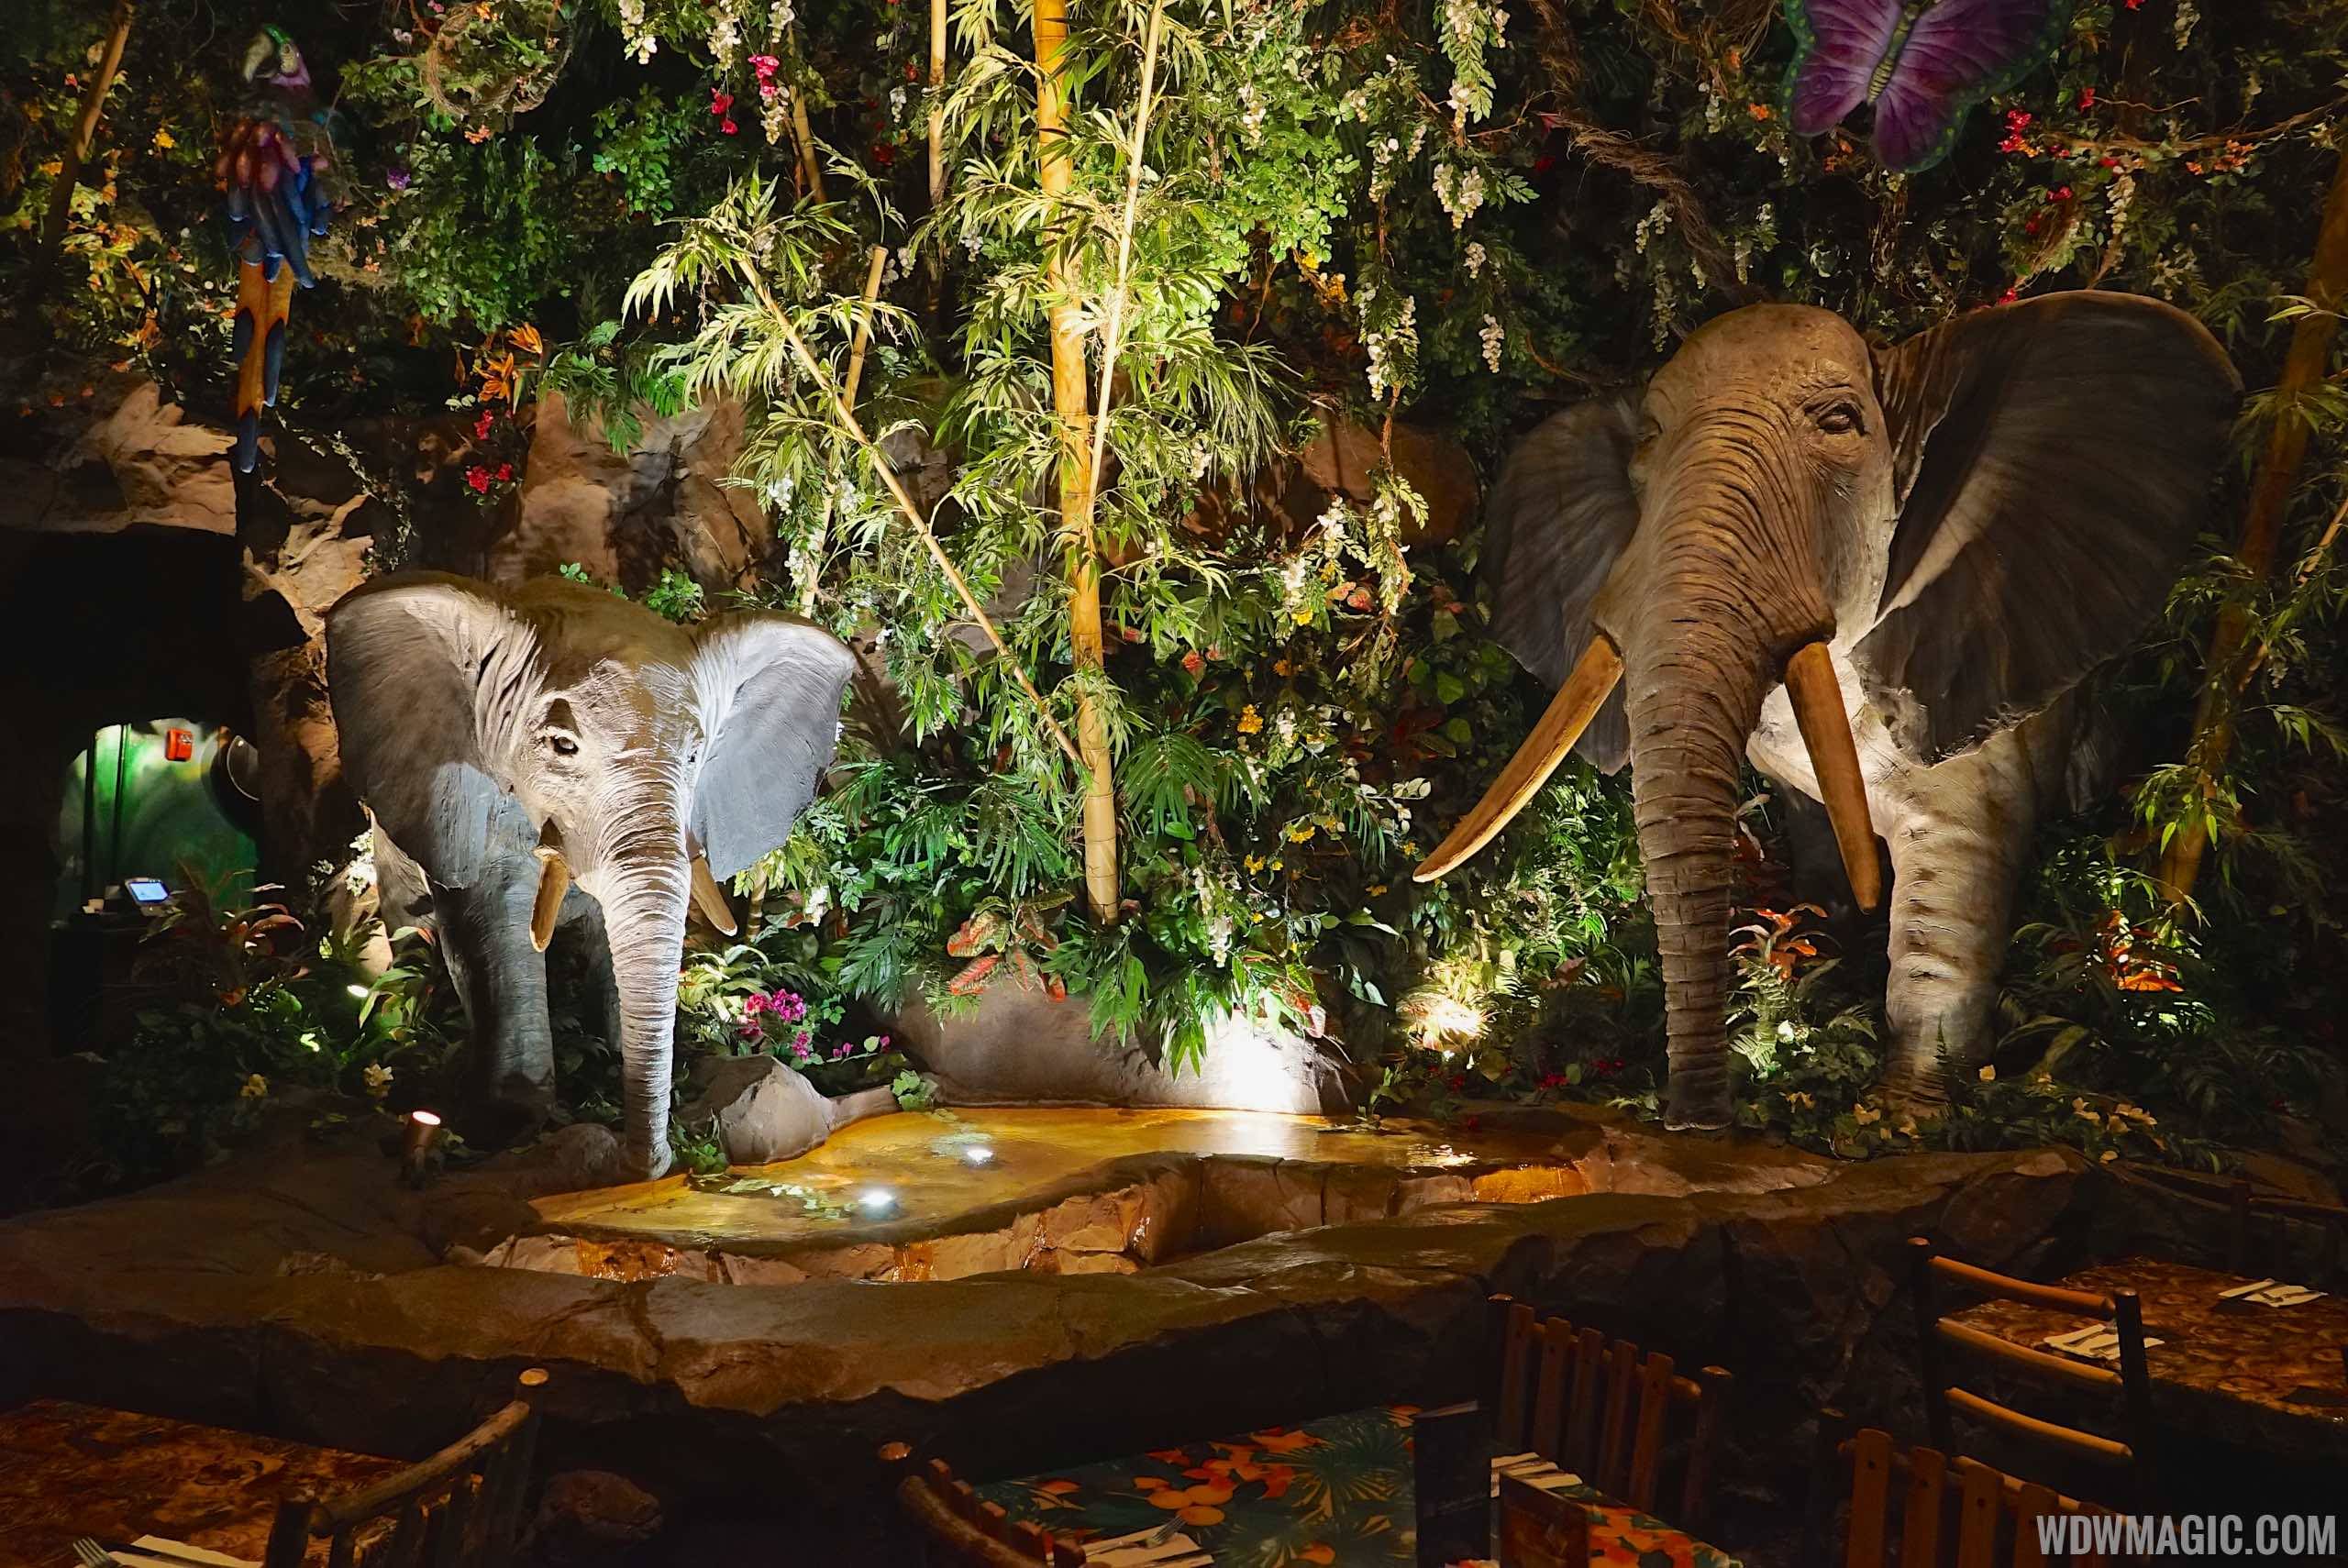 Half-price Rainforest Cafe gift cards available today